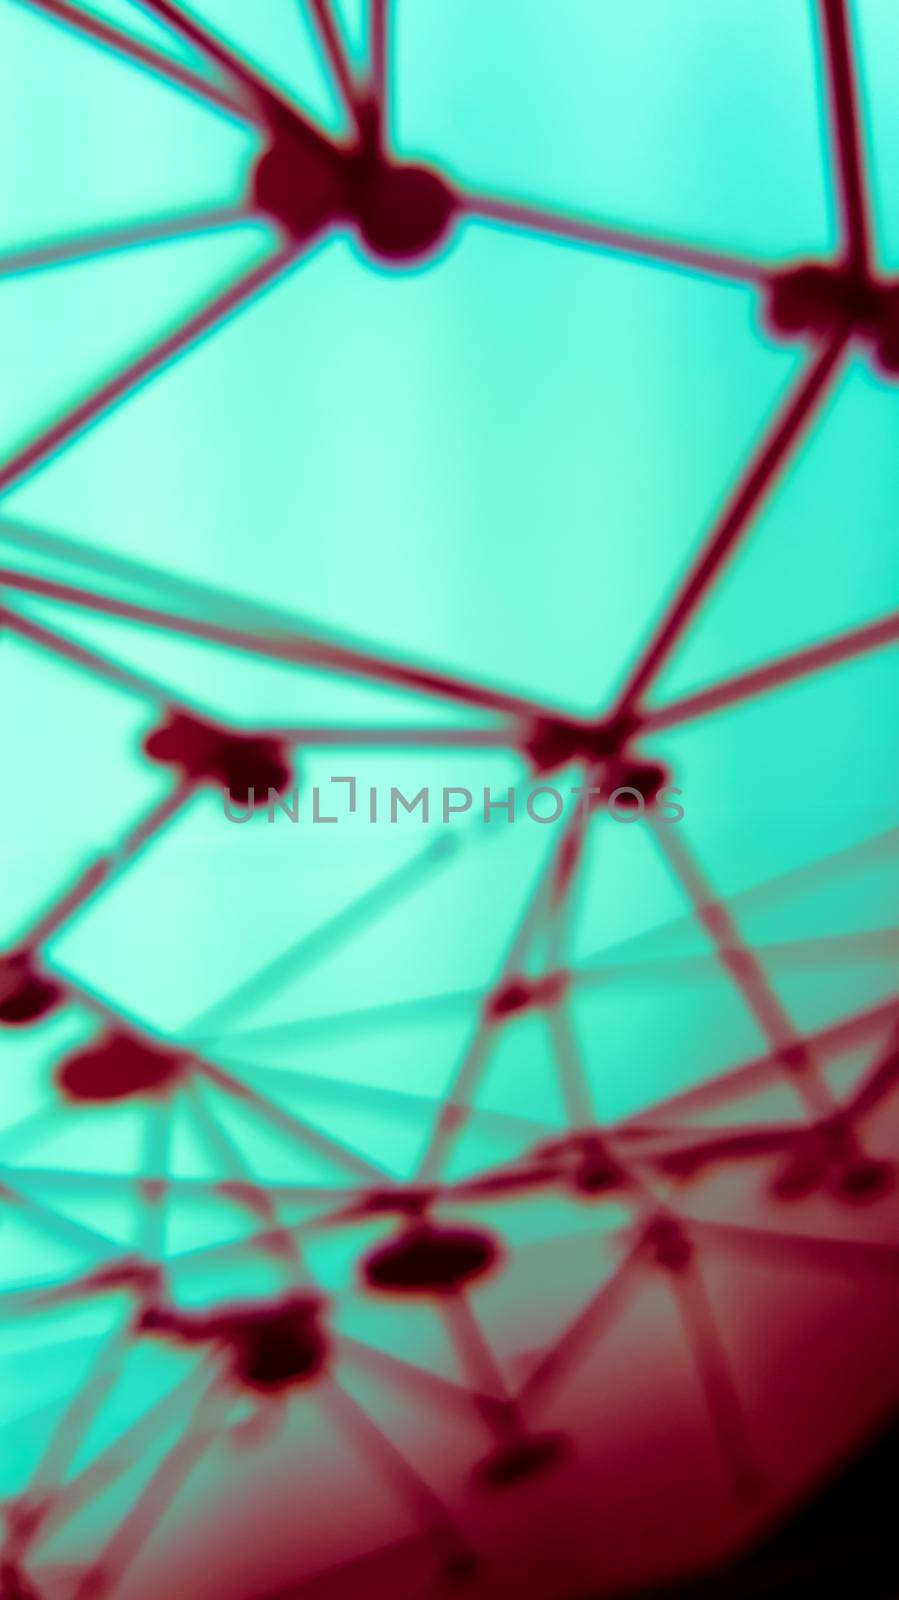 Blur background of sphere network structure. Connection abstract design.